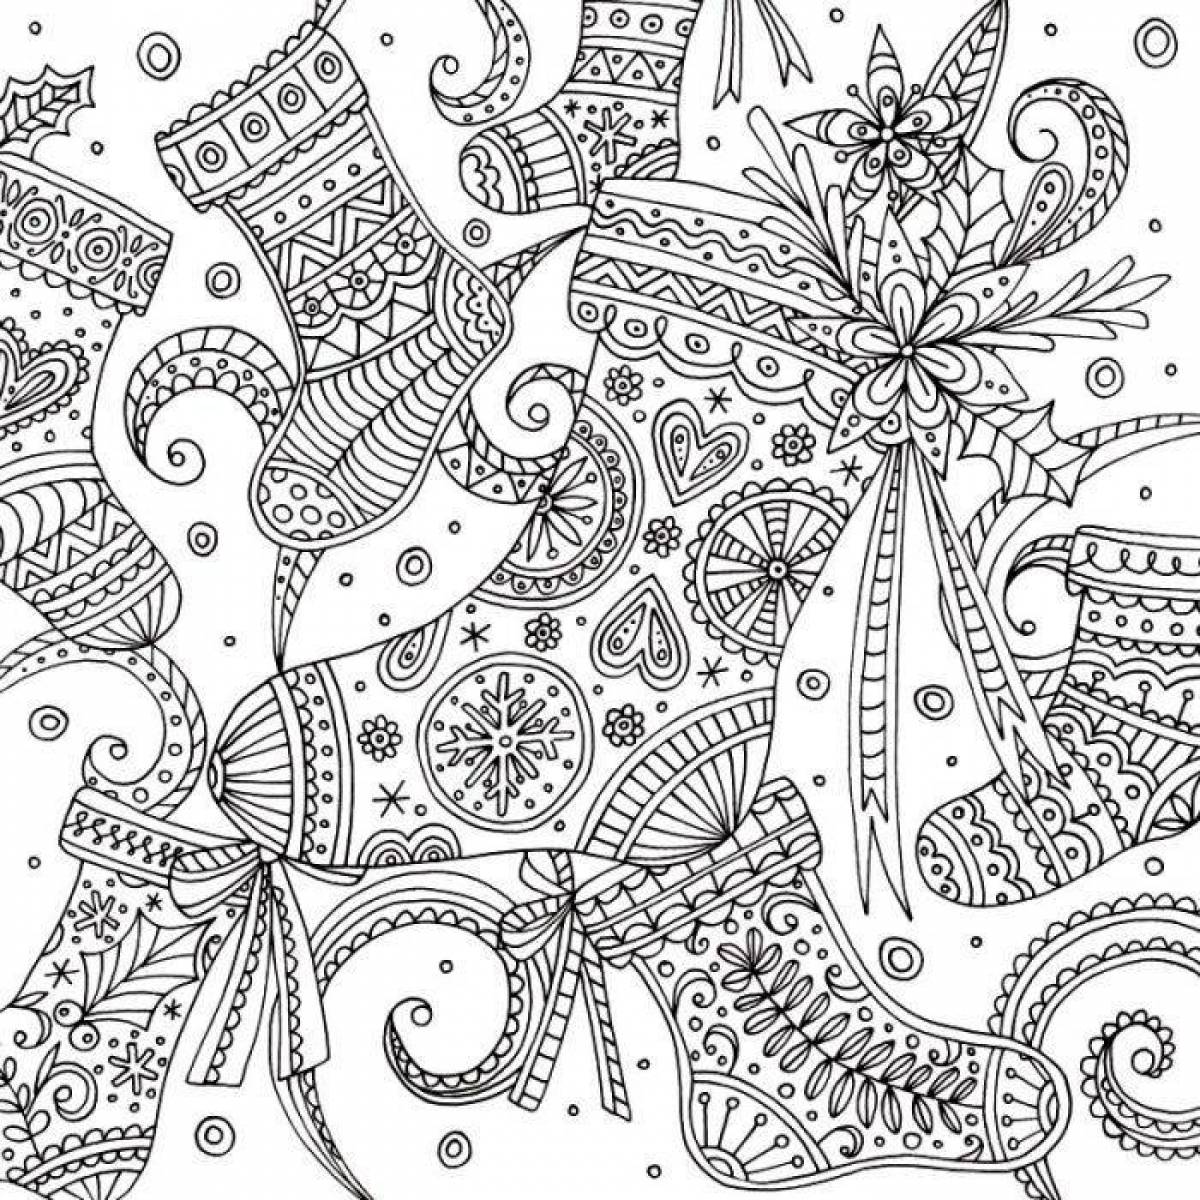 Soothing anti-stress Christmas coloring book